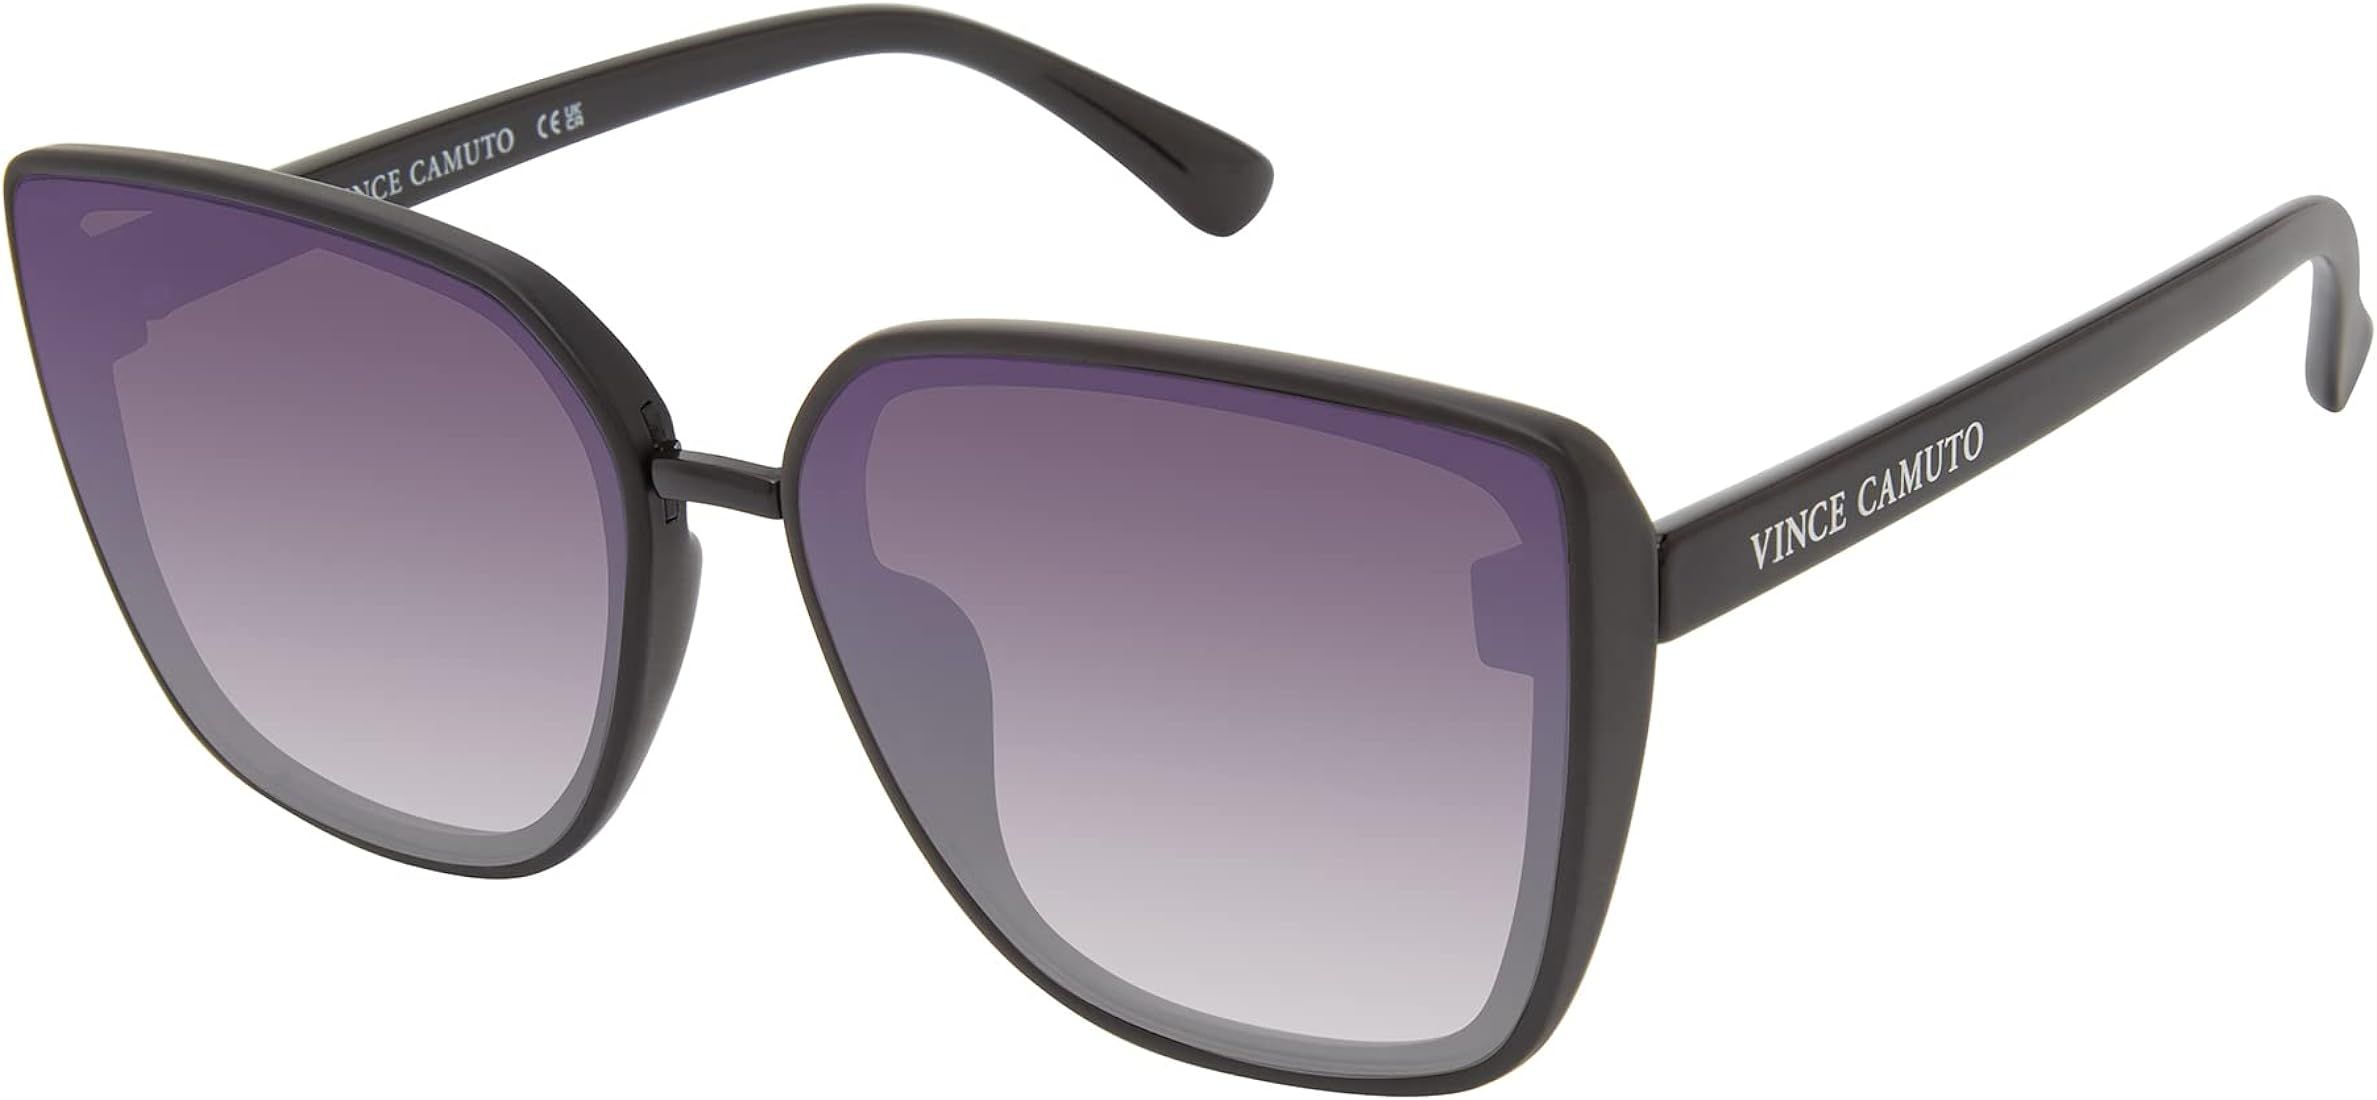 Vc975 Stylish Flush Lens 100% Uv Protective Women's Cat Eye Sunglasses. Luxe Gifts for Her, 61 Mm | Amazon (US)